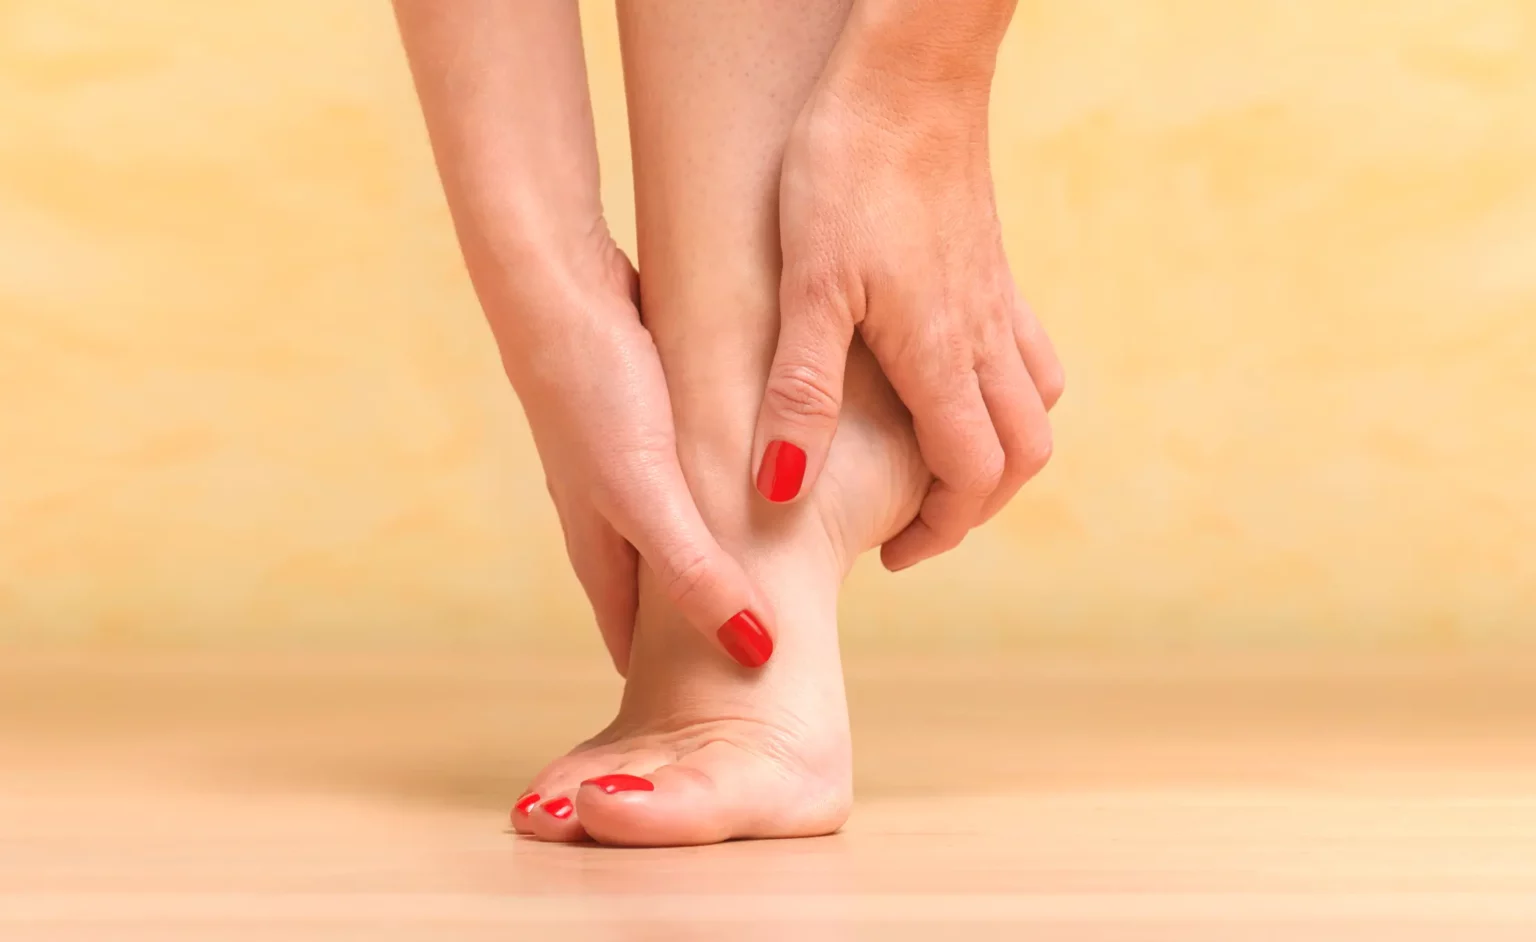 wanna-get-rid-of-your-feet-hurt-how-can-you-heal-plantar-fasciitis